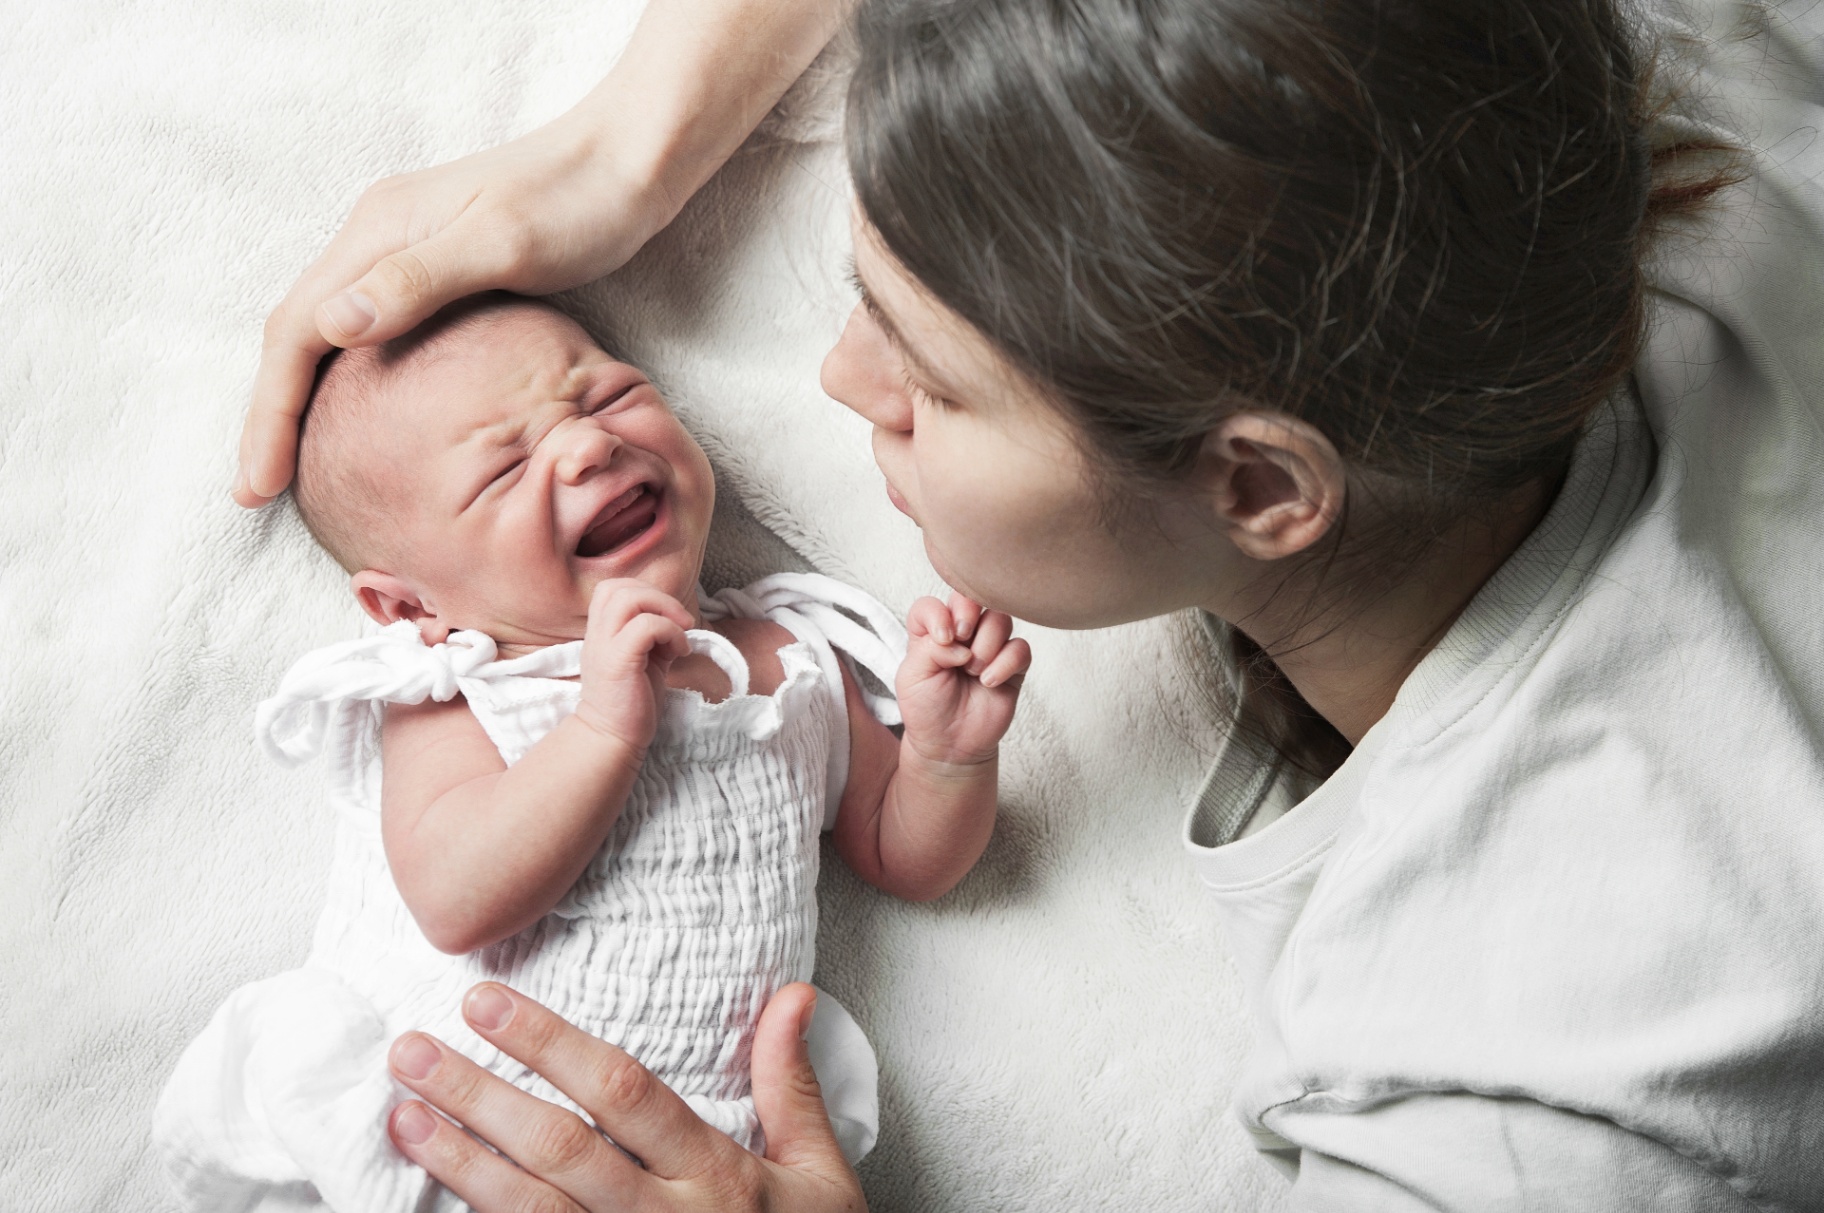 Photo of a young mom laying down comforting her baby while it cries. Suffering from postpartum anxiety? Learn how postpartum counseling in San Francisco, CA can help you heal from your postpartum symptoms.